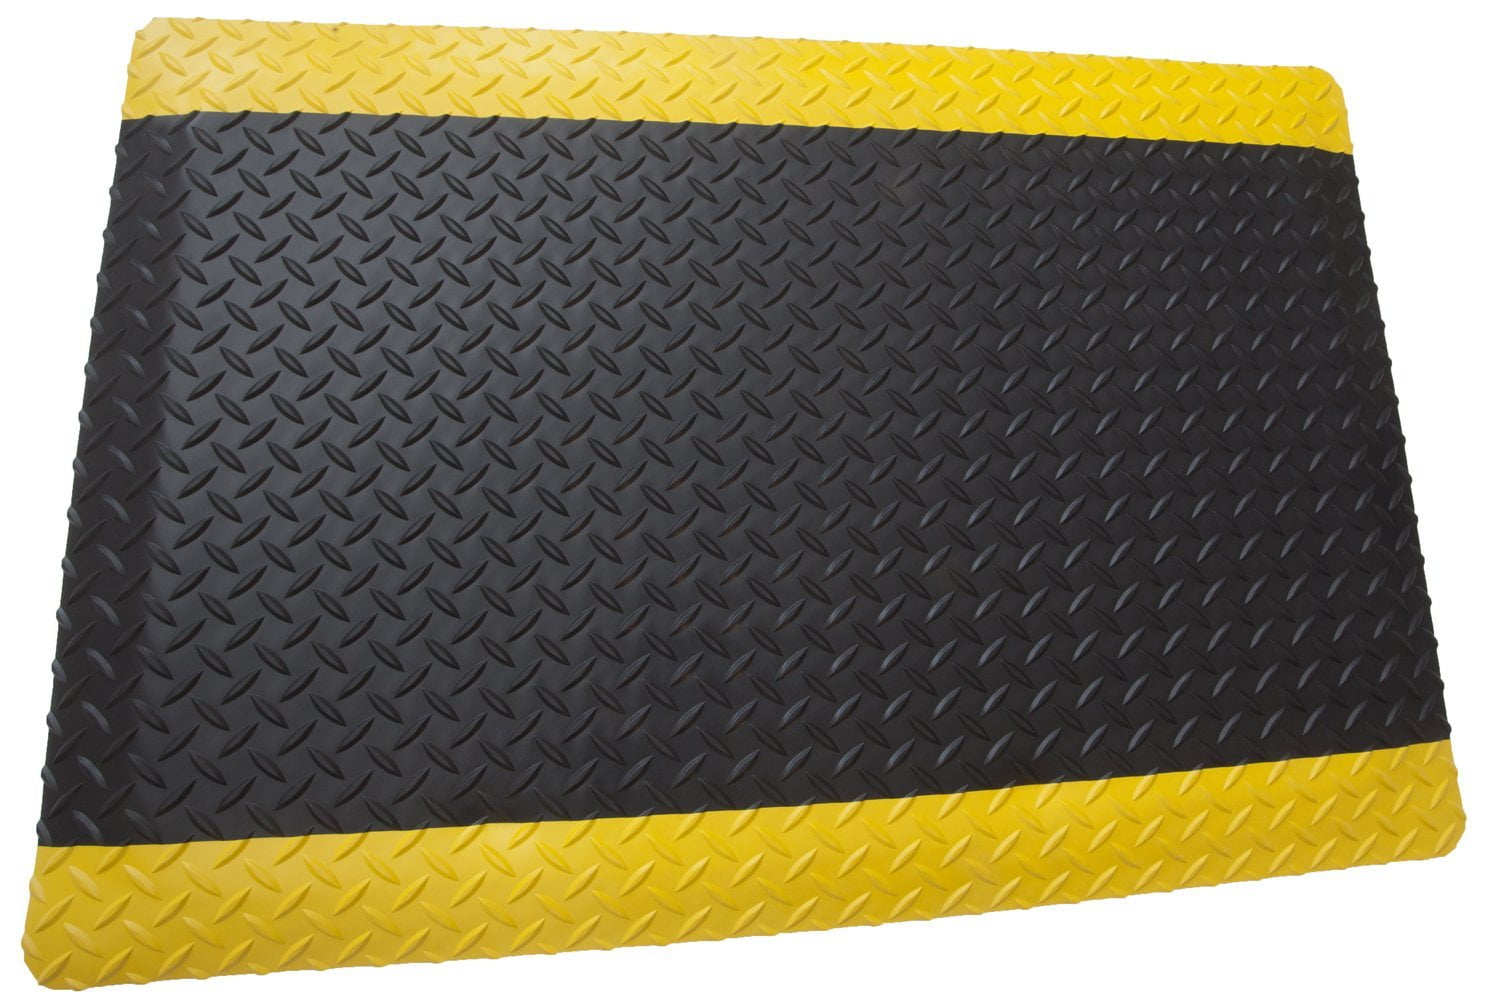 Rhino Anti-Fatigue Mats Industrial Smooth 4 ft. x 5 ft. x 7/8 in. Commercial Floor Mat Anti-Fatigue, Black IS48DSX5